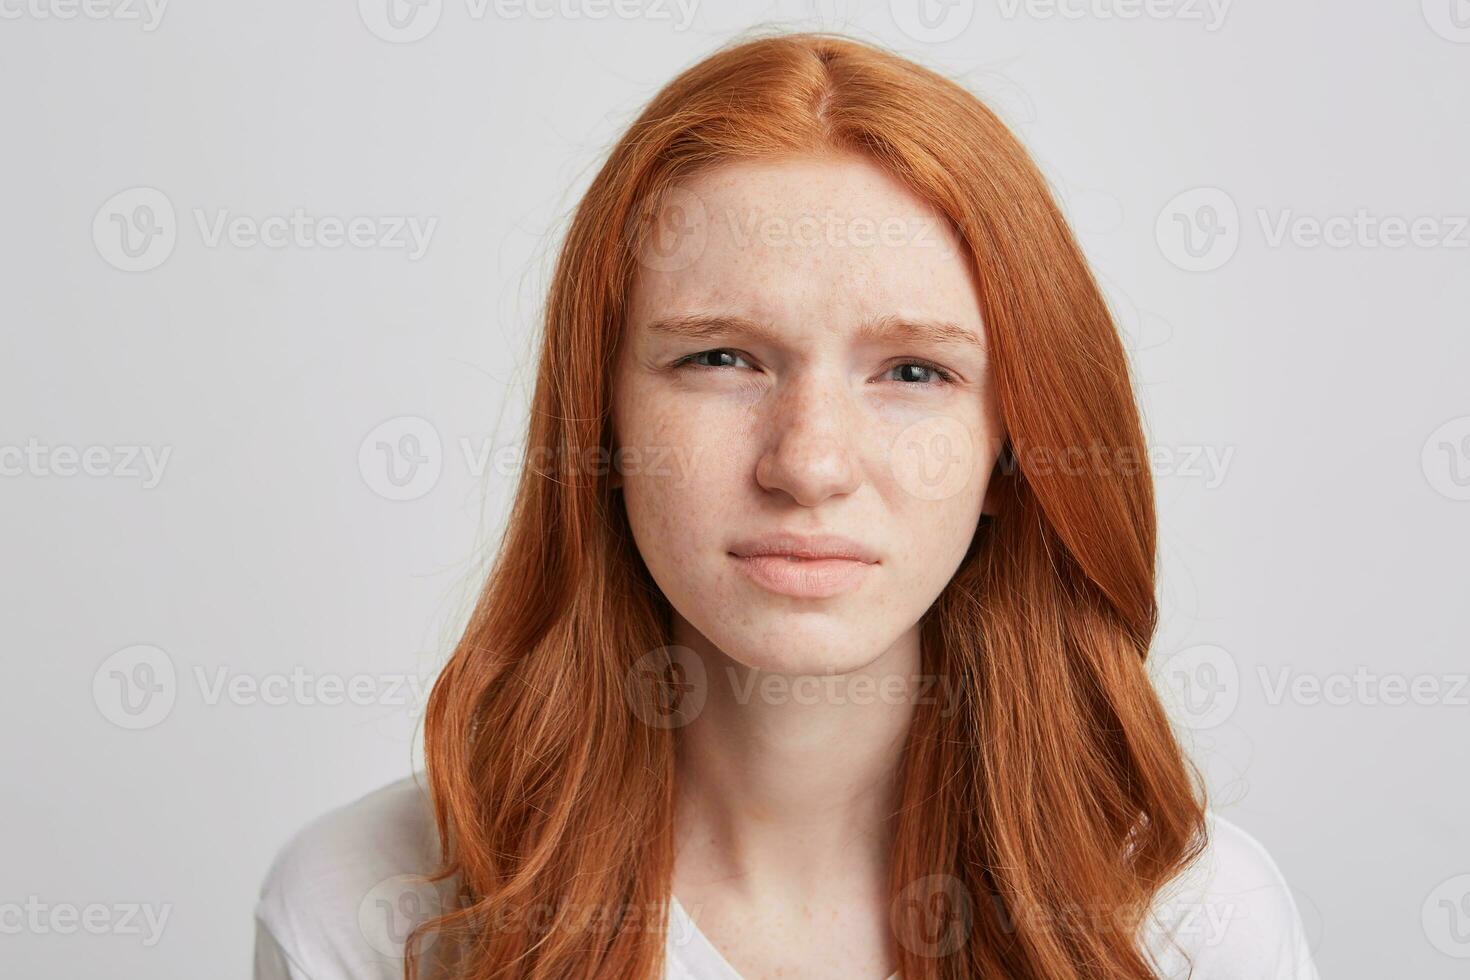 Portrait of sad unhappy young woman with long wavy red hair and freckles feels upset and looks directly in camera isolated over white background photo